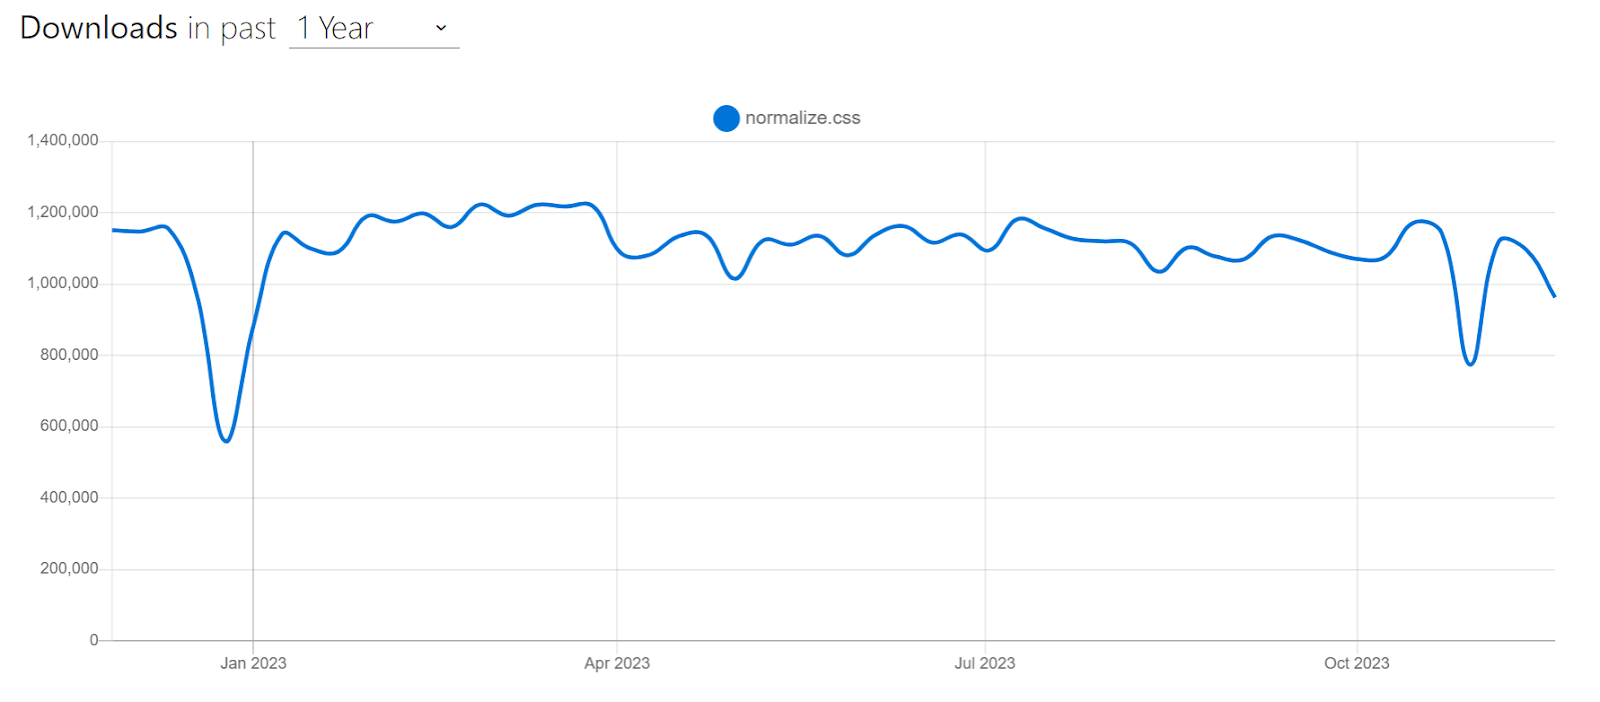 Normalizecss weekly downloads through npm trends